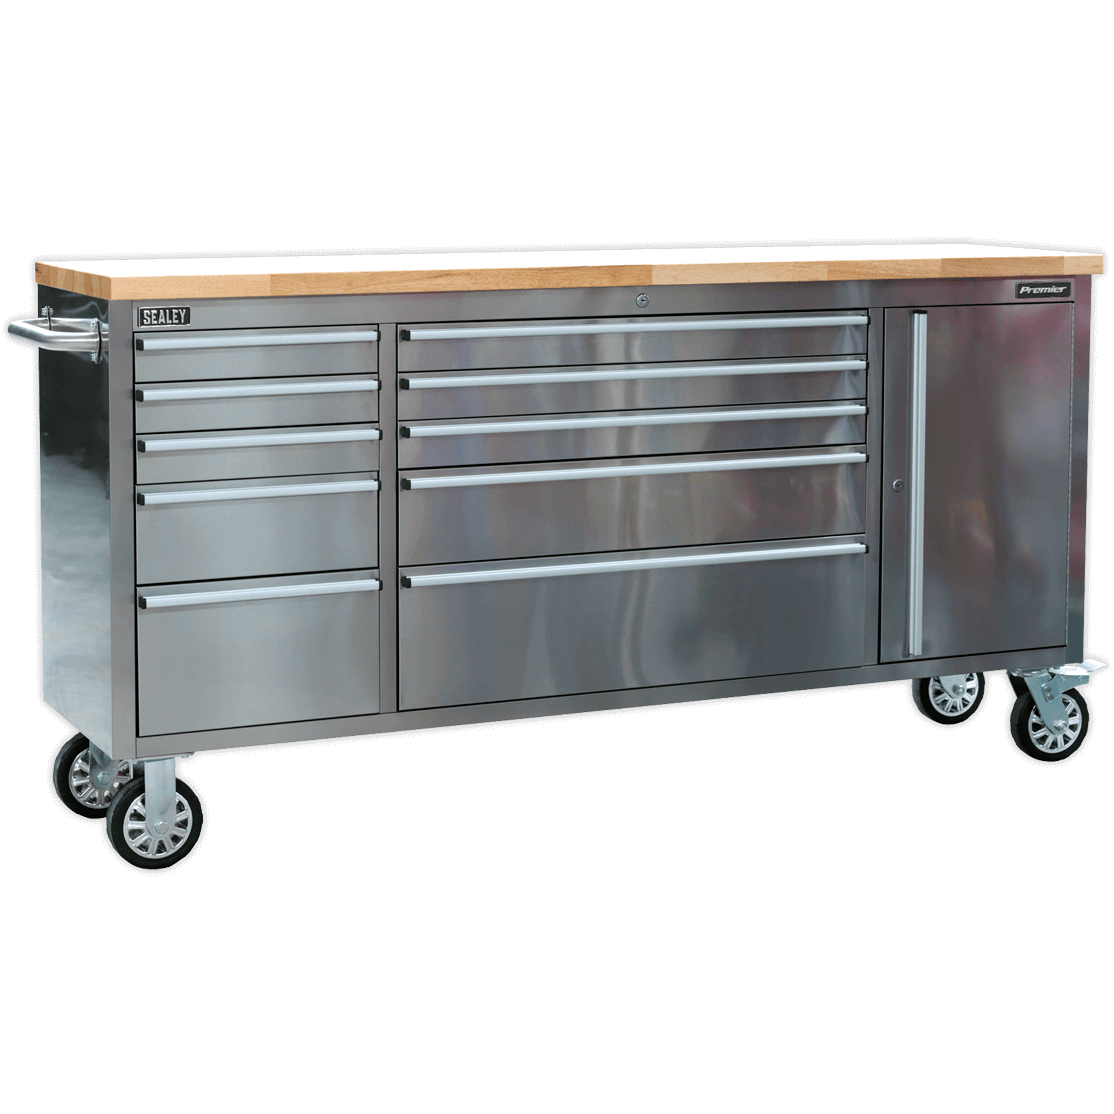 Sealey 10 Drawer Mobile Stainless Steel Tool Cabinet And End